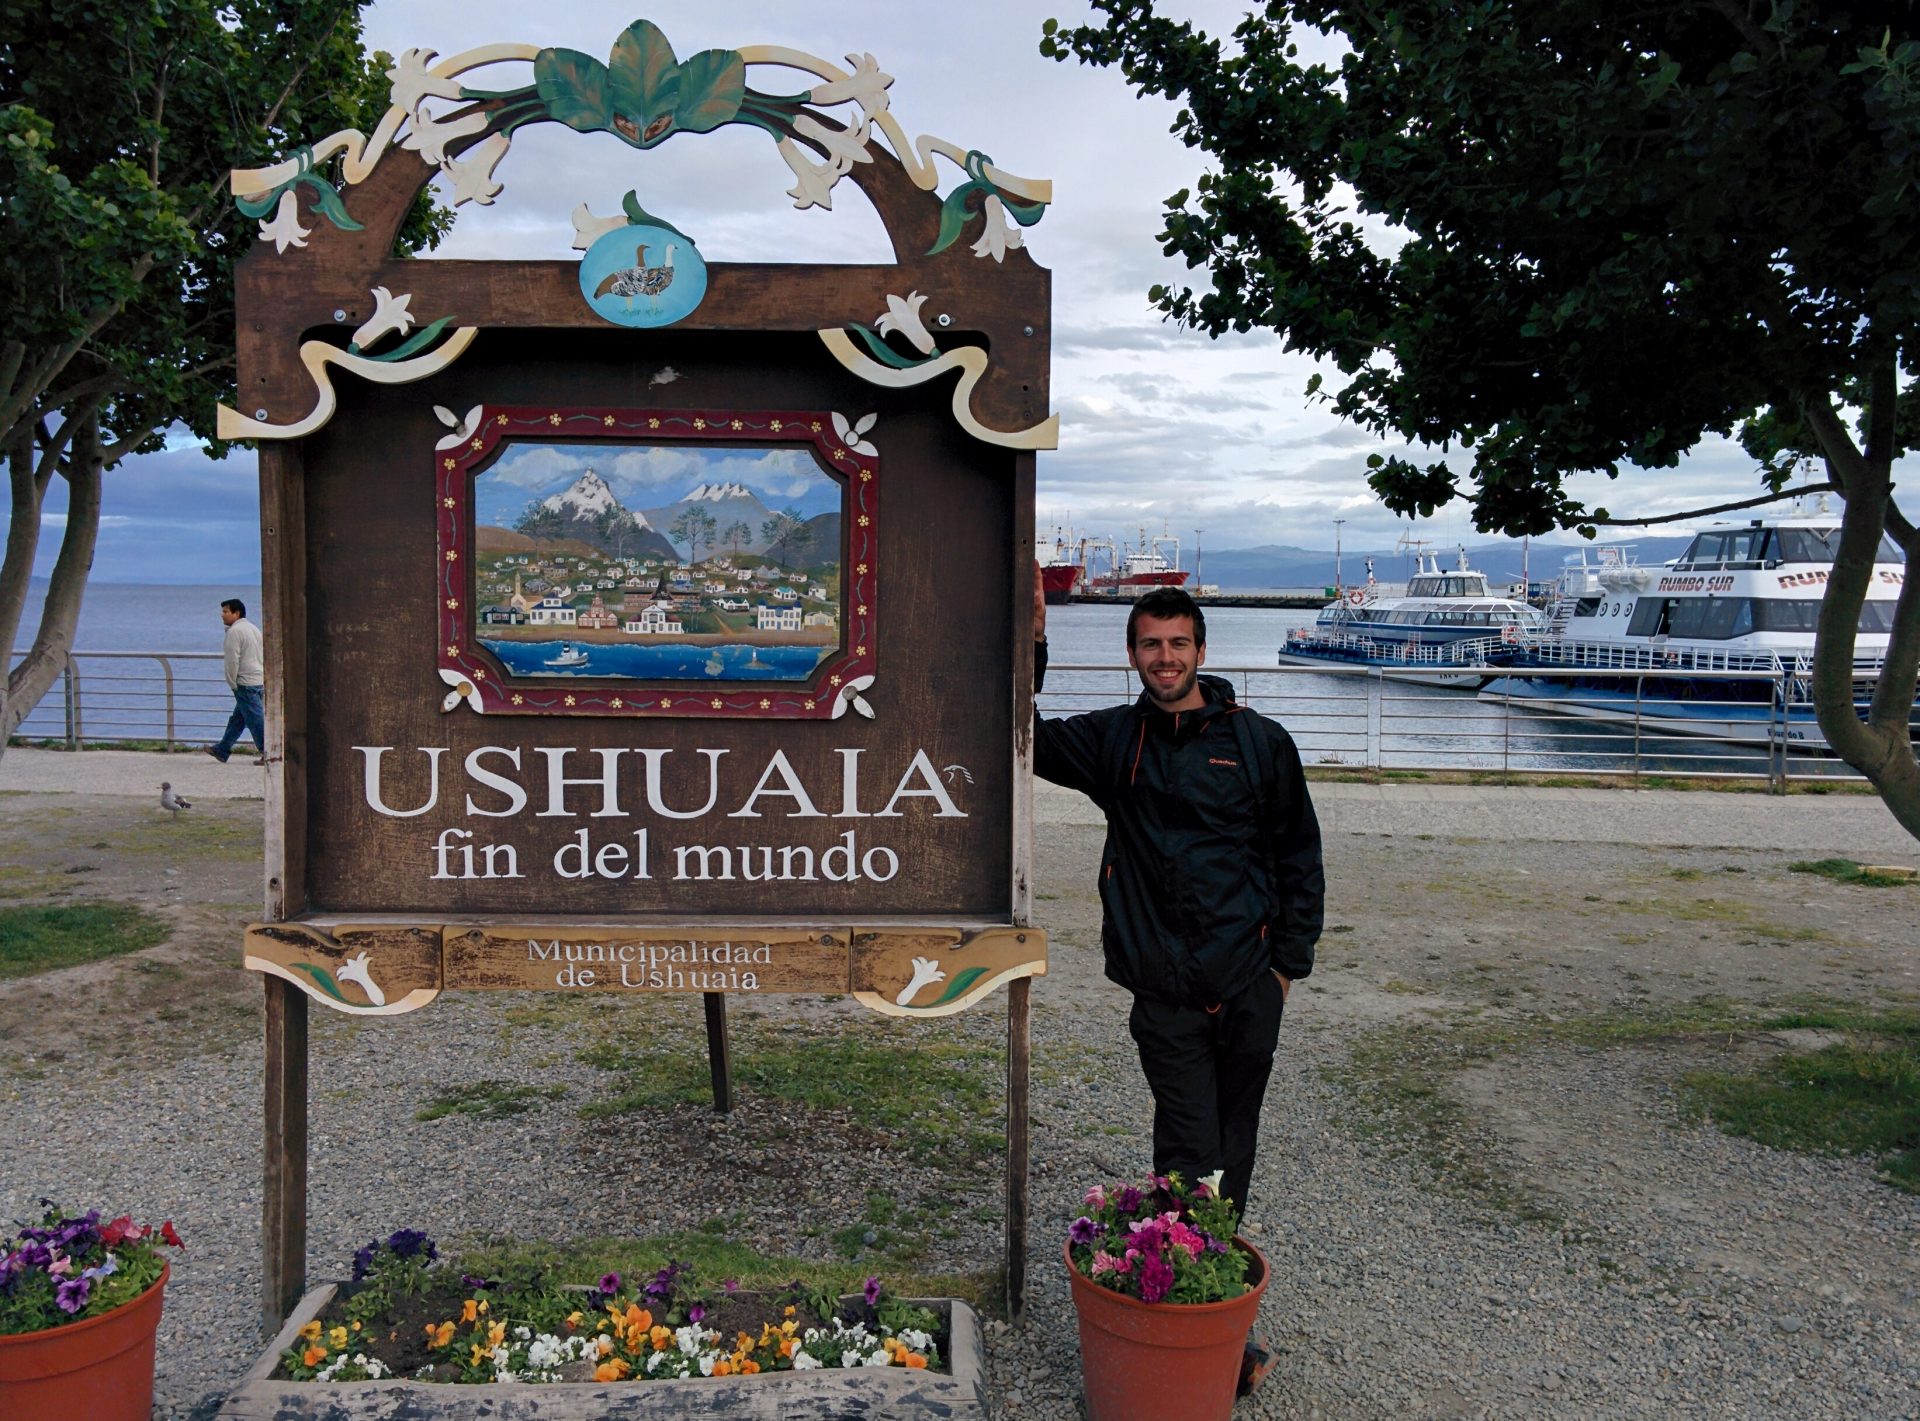 Me with the sign that said Ushuaia fin del Mundo